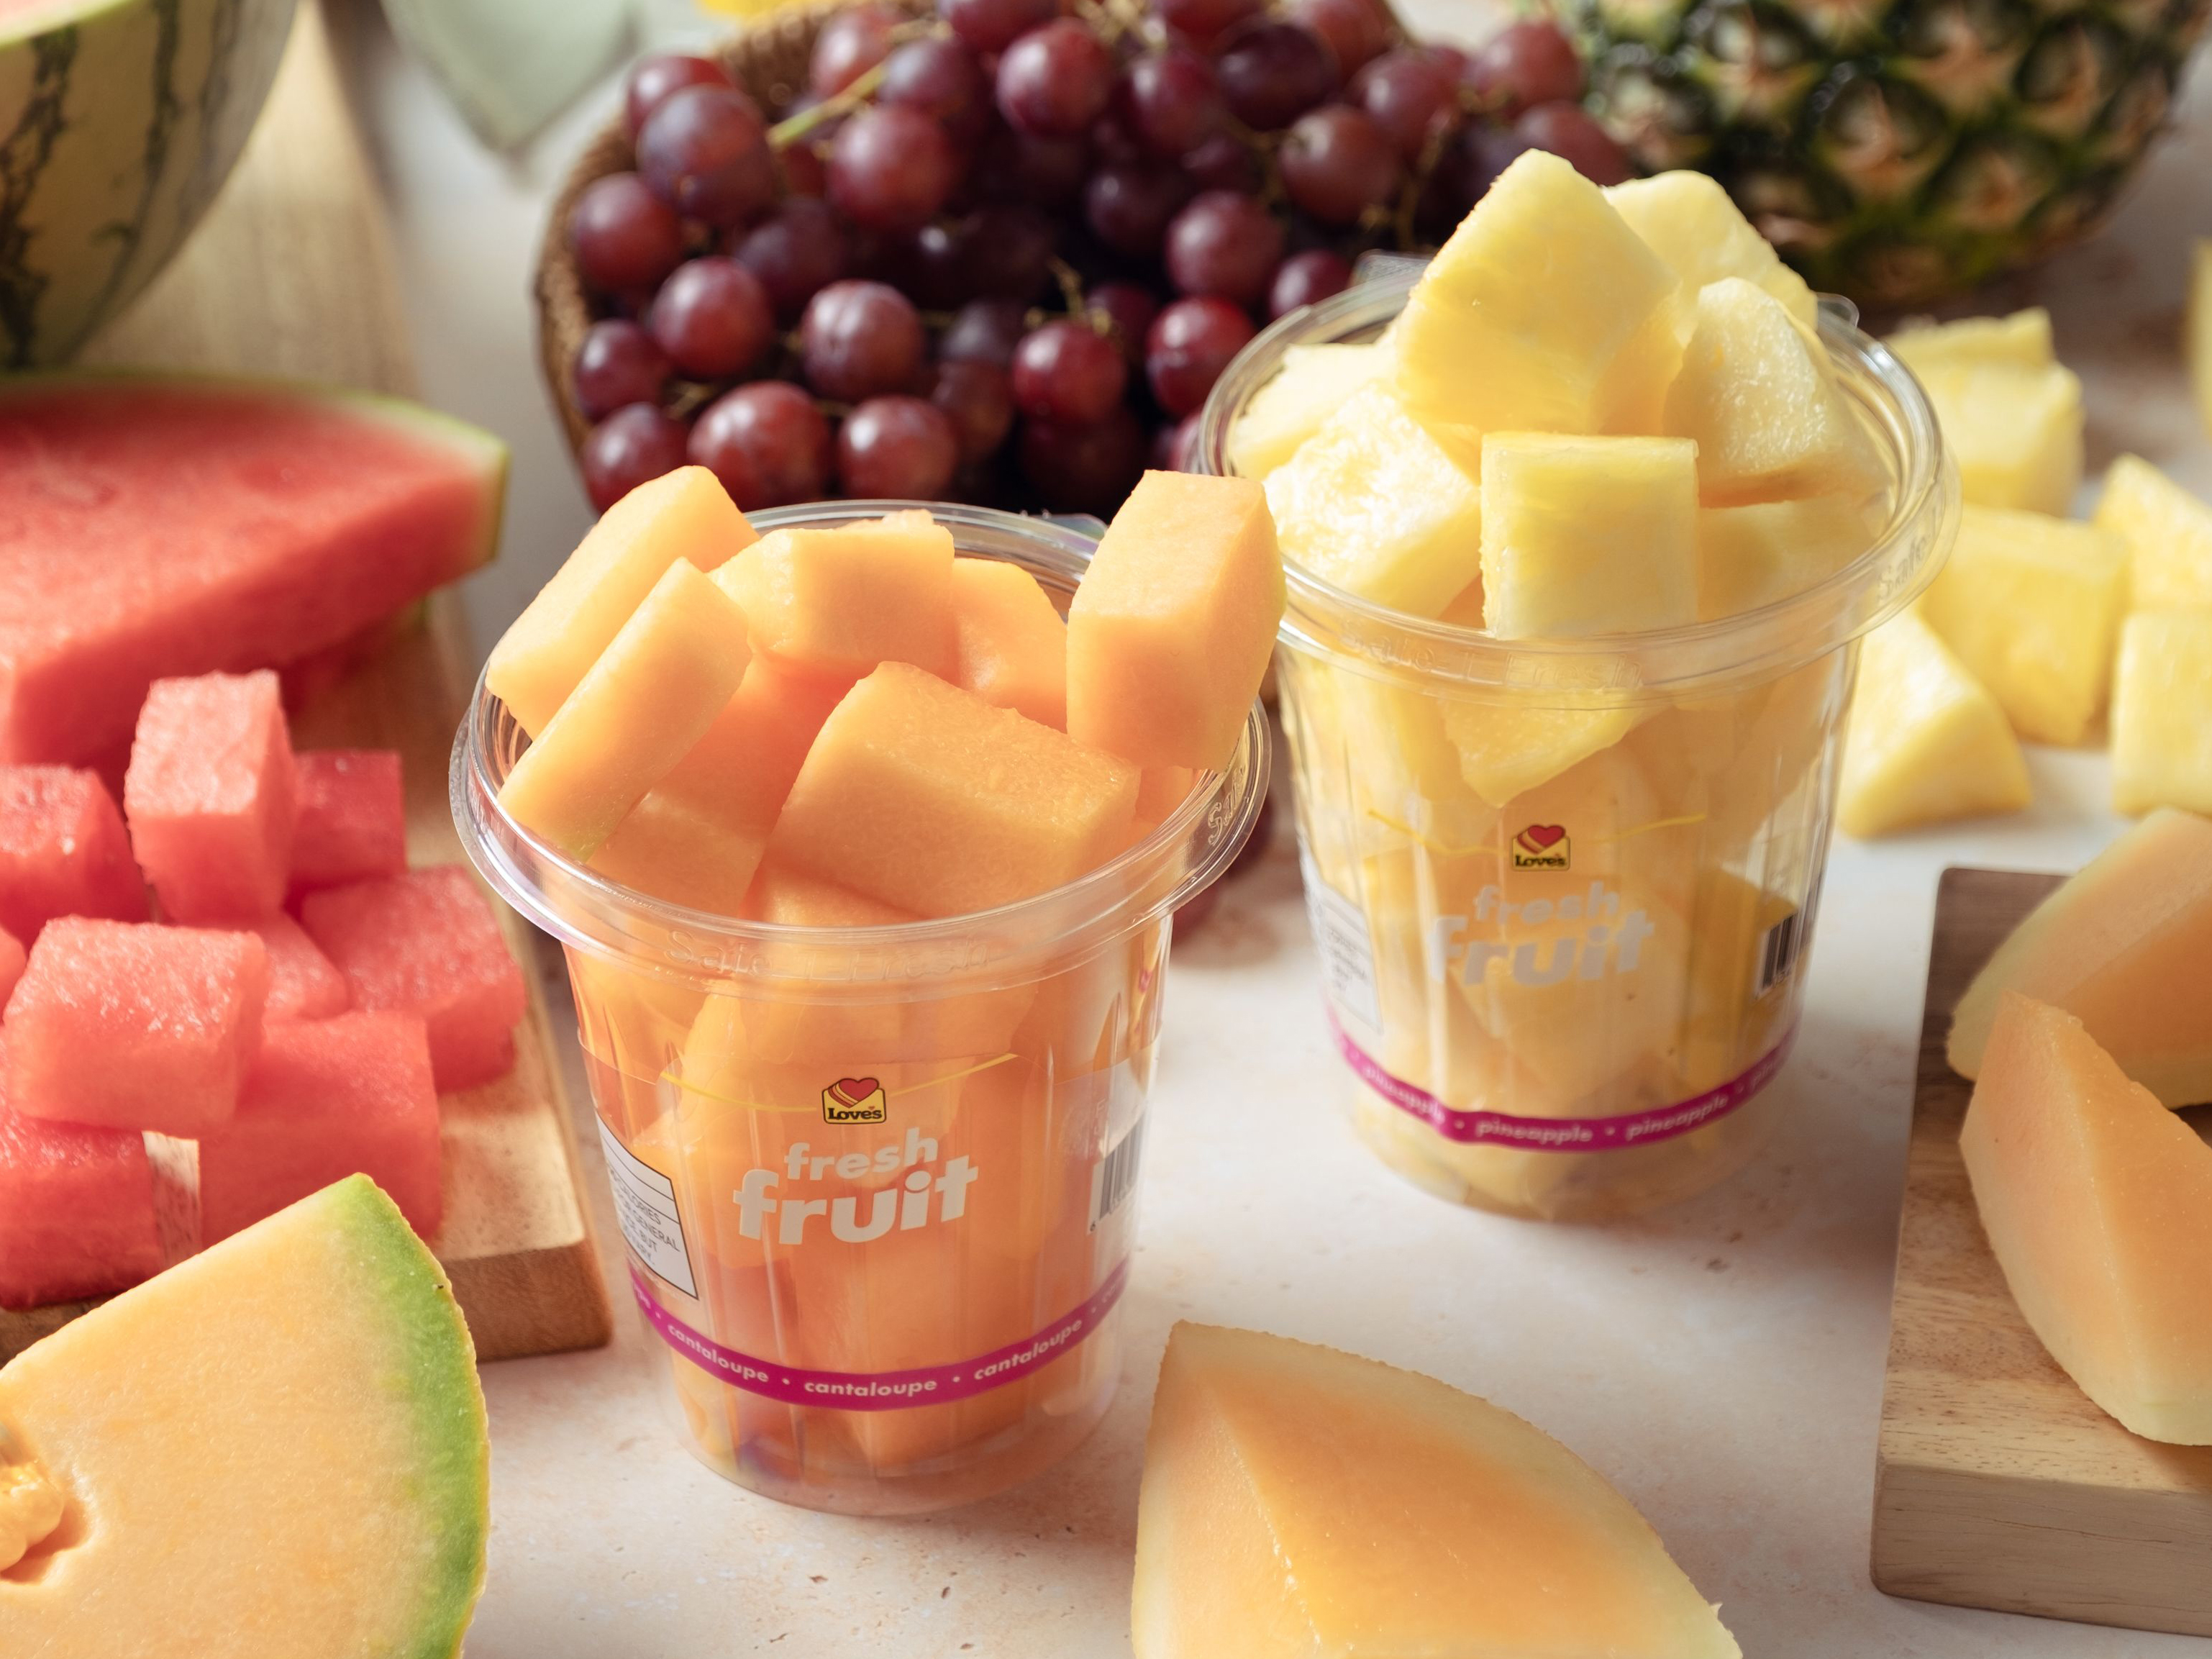 Love's Fresh To Go Cantaloupe and Pineapple Fruit Cups